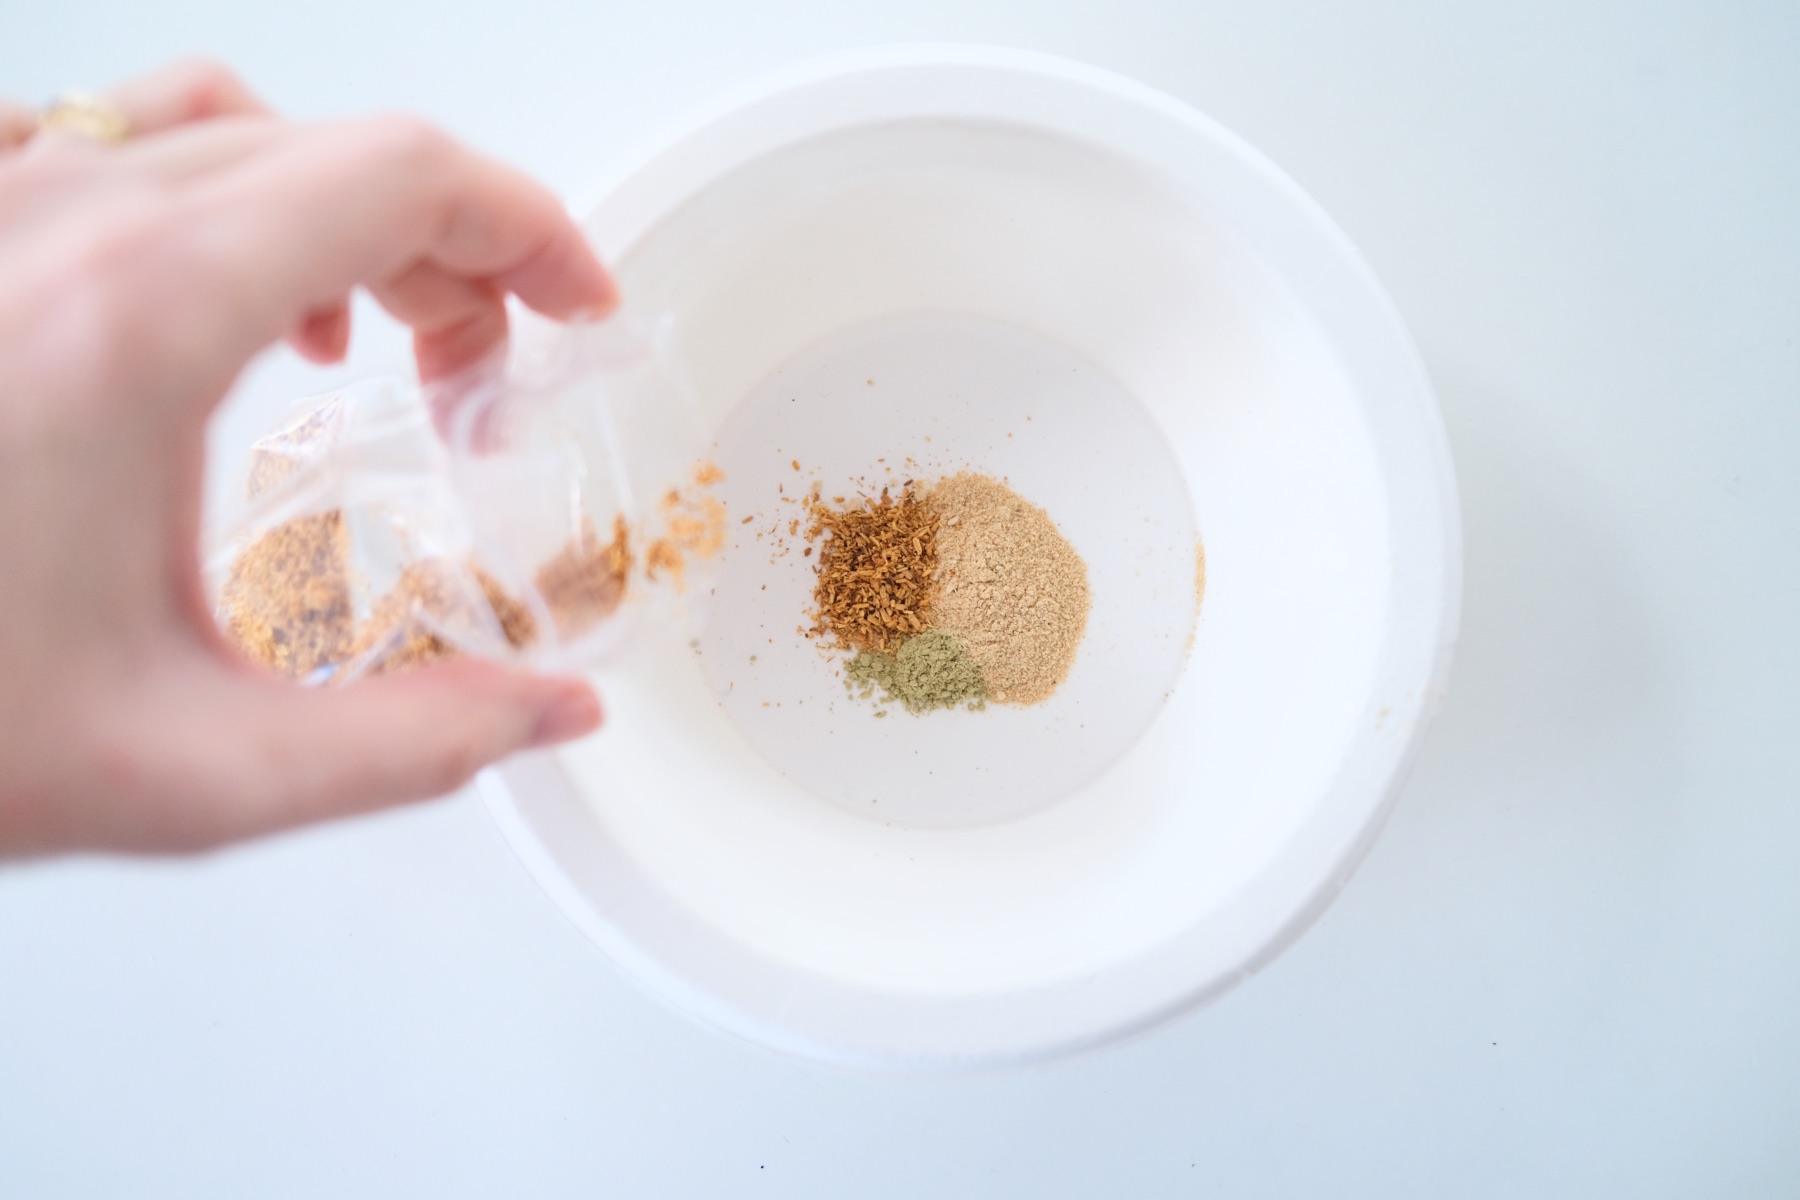 add palo santo to the bowl of other powdered herbs